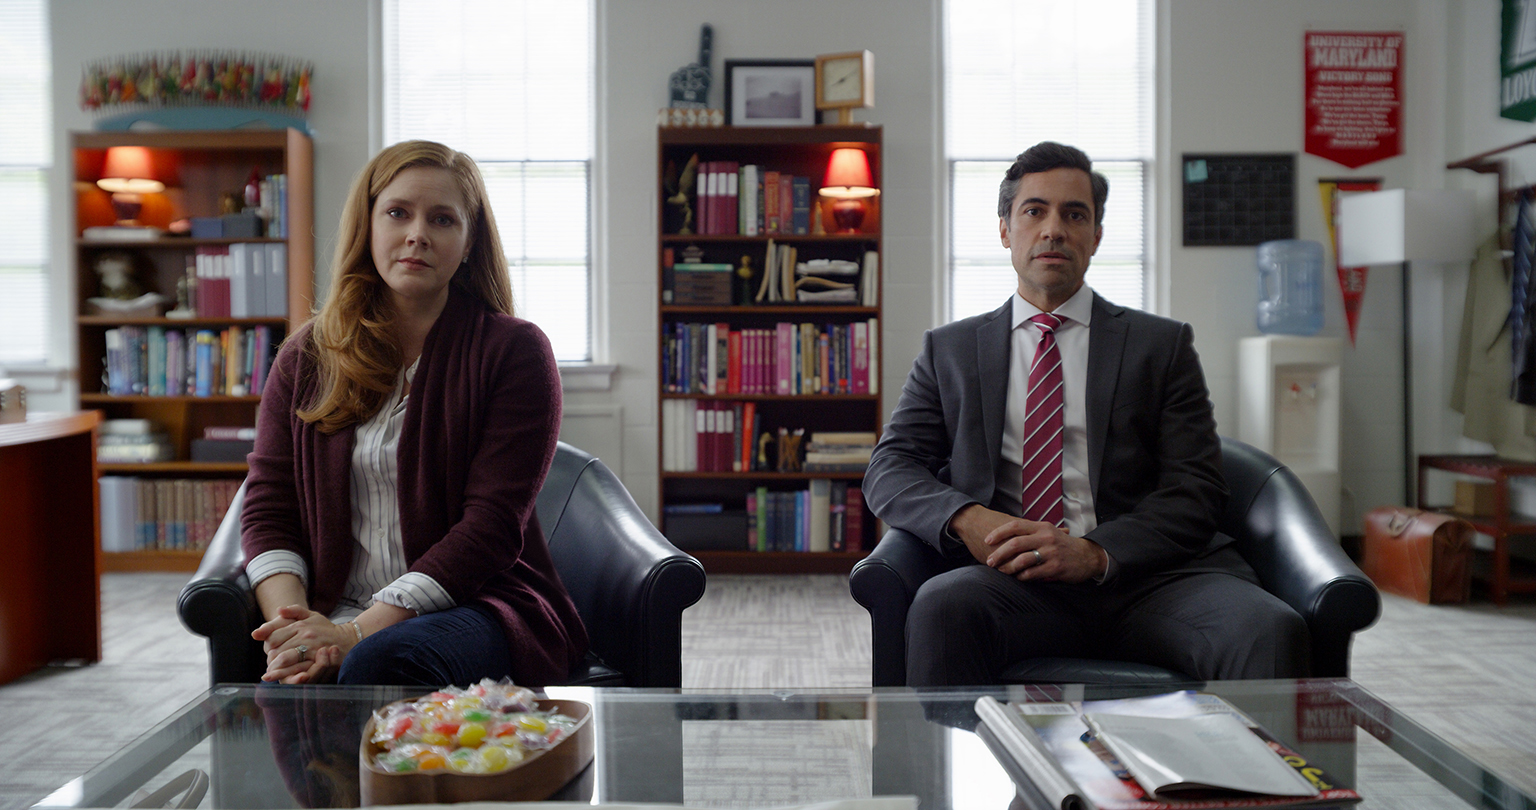 Amy Adams as Cynthia Murphy and Danny Pino as Larry Mora in Dear Evan Hansen, directed by Stephen Chbosky. Image: Universal Pictures